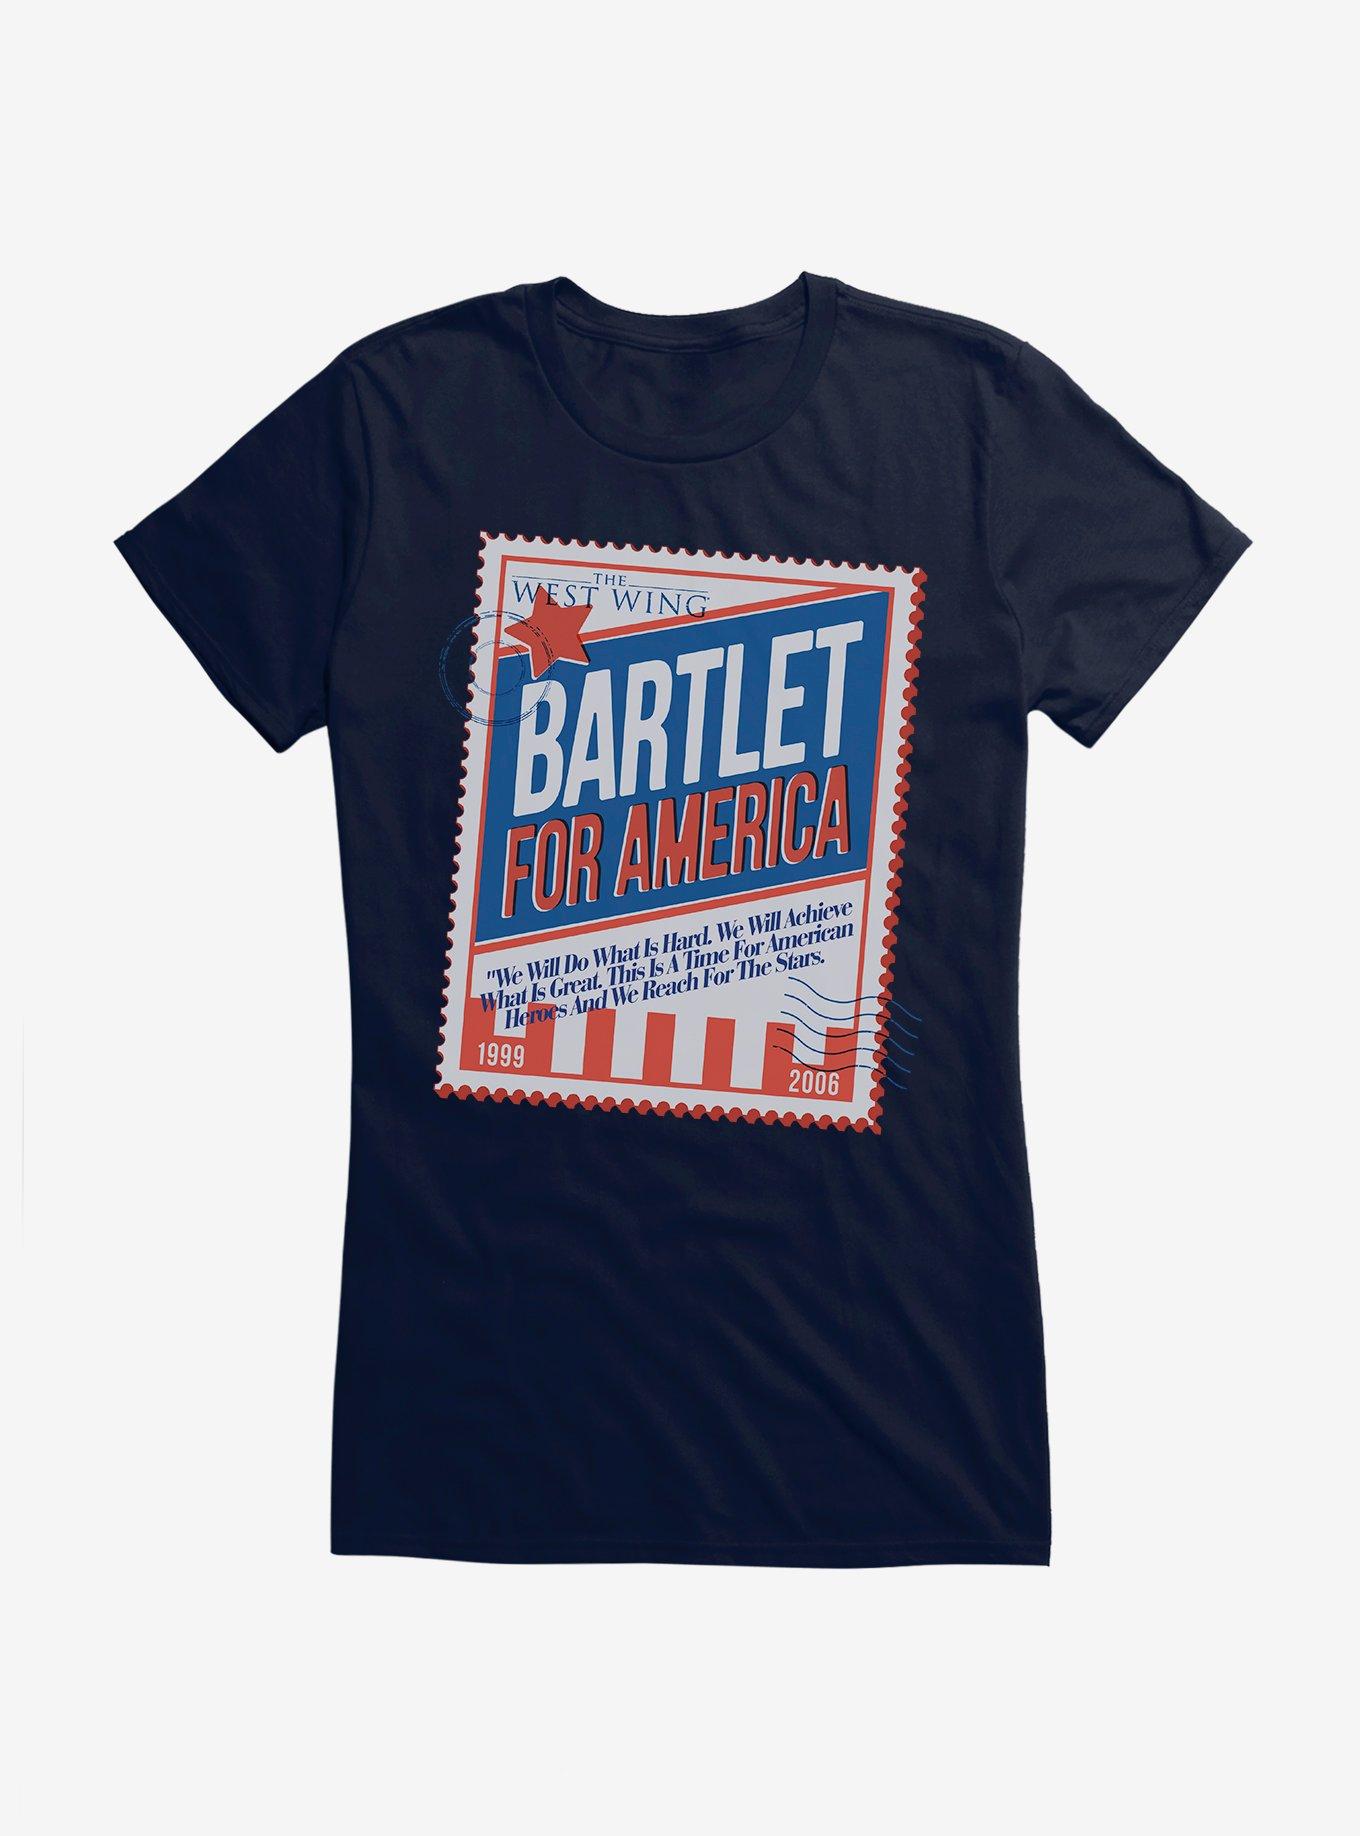 West Wing WB 100 Bartlet For America Girls T-Shirt